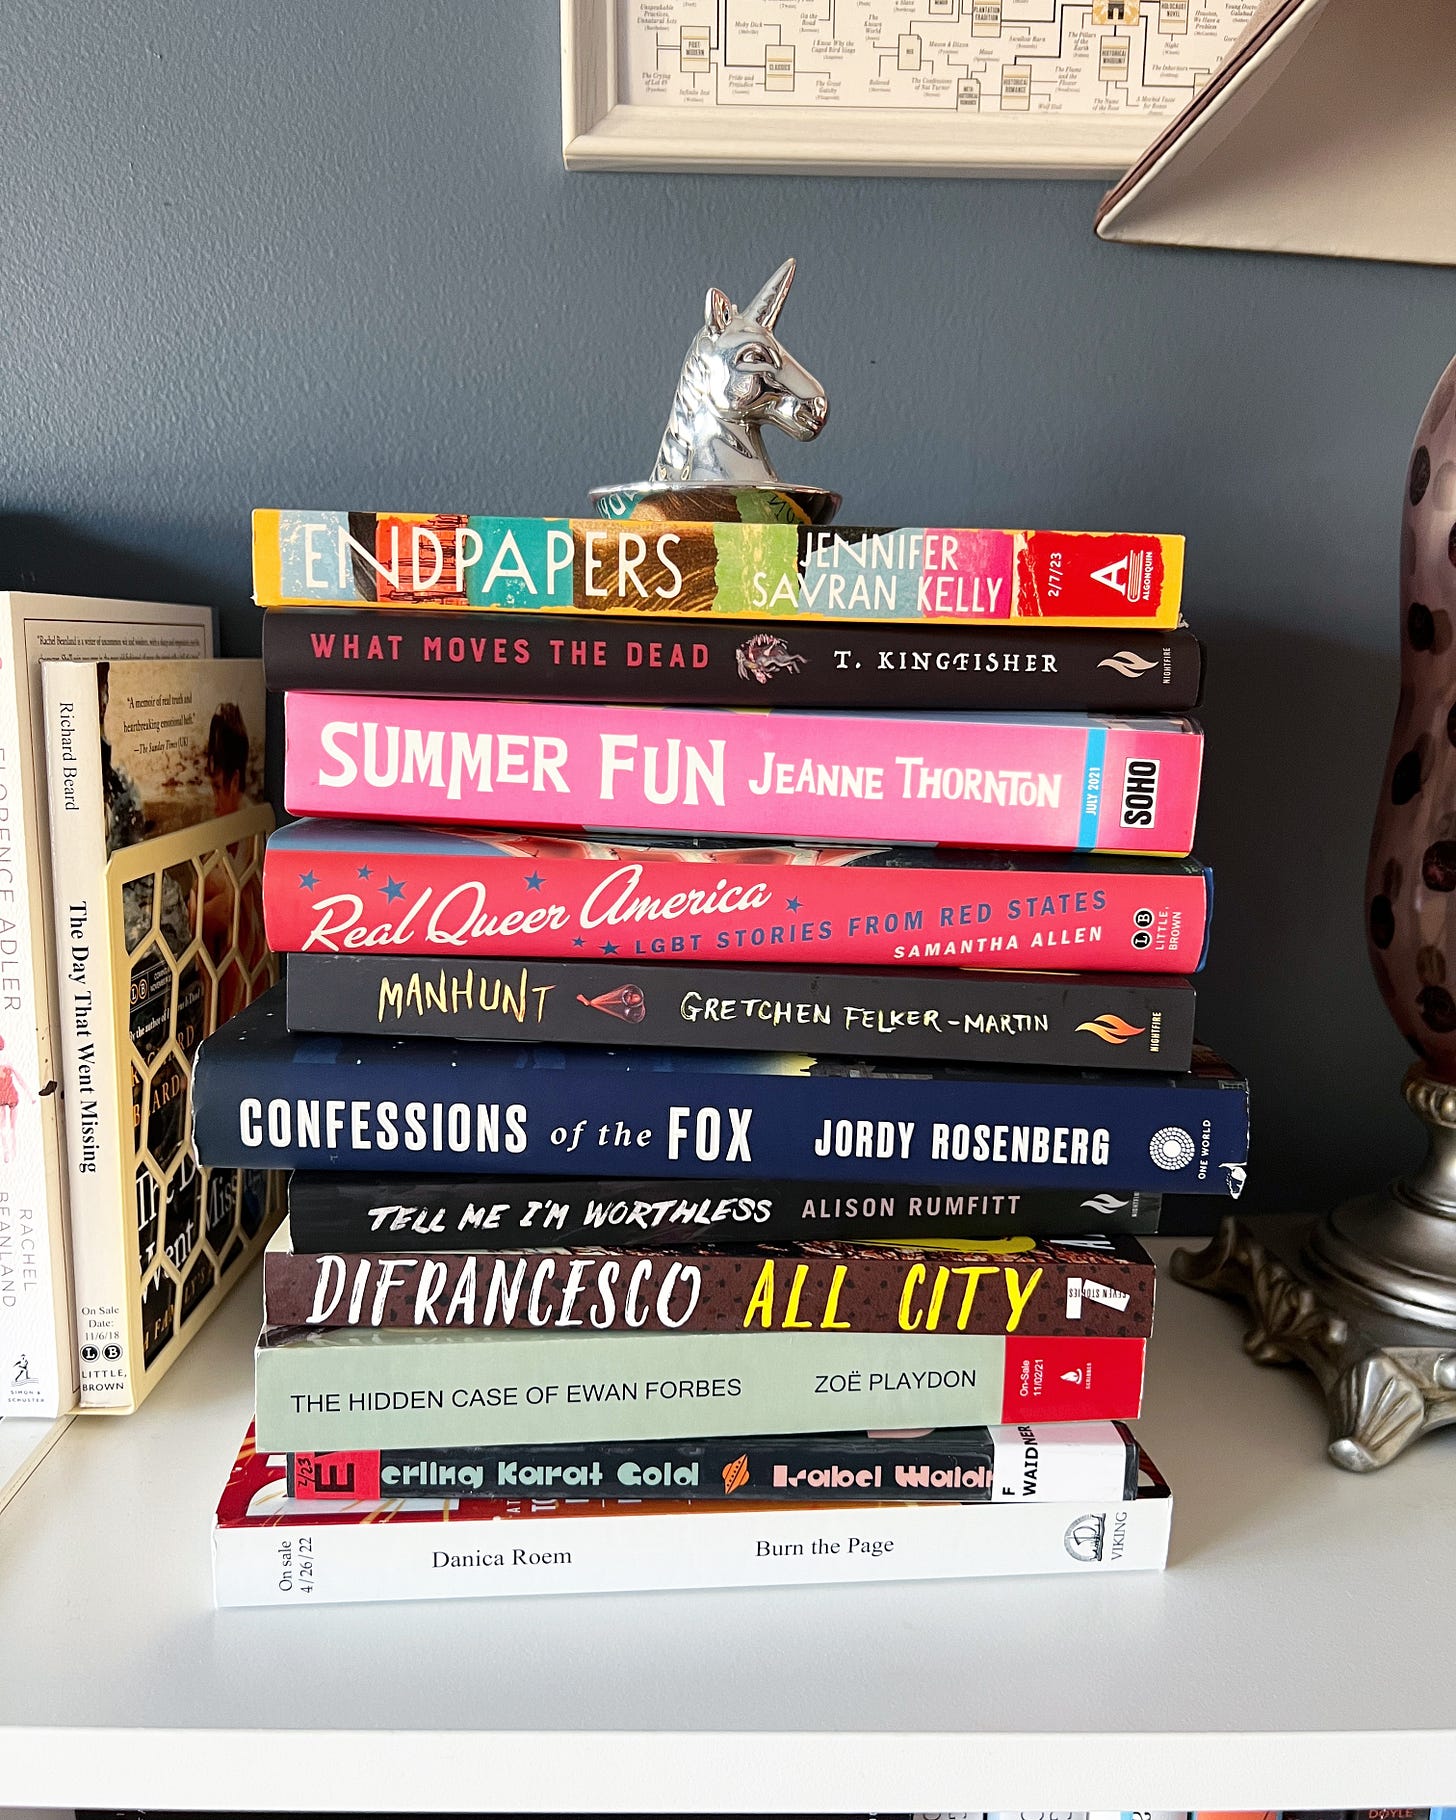 A stack of trans books with a silver unicorn head on top. The books include Endpapers, What Moves the Dead, Summer Fun, Real Queer America, Manhunt, Confessions of the Fox, Tell Me I'm Worthless, All City, The Hidden Case of Ewan Forbes, and Burn the Page. 